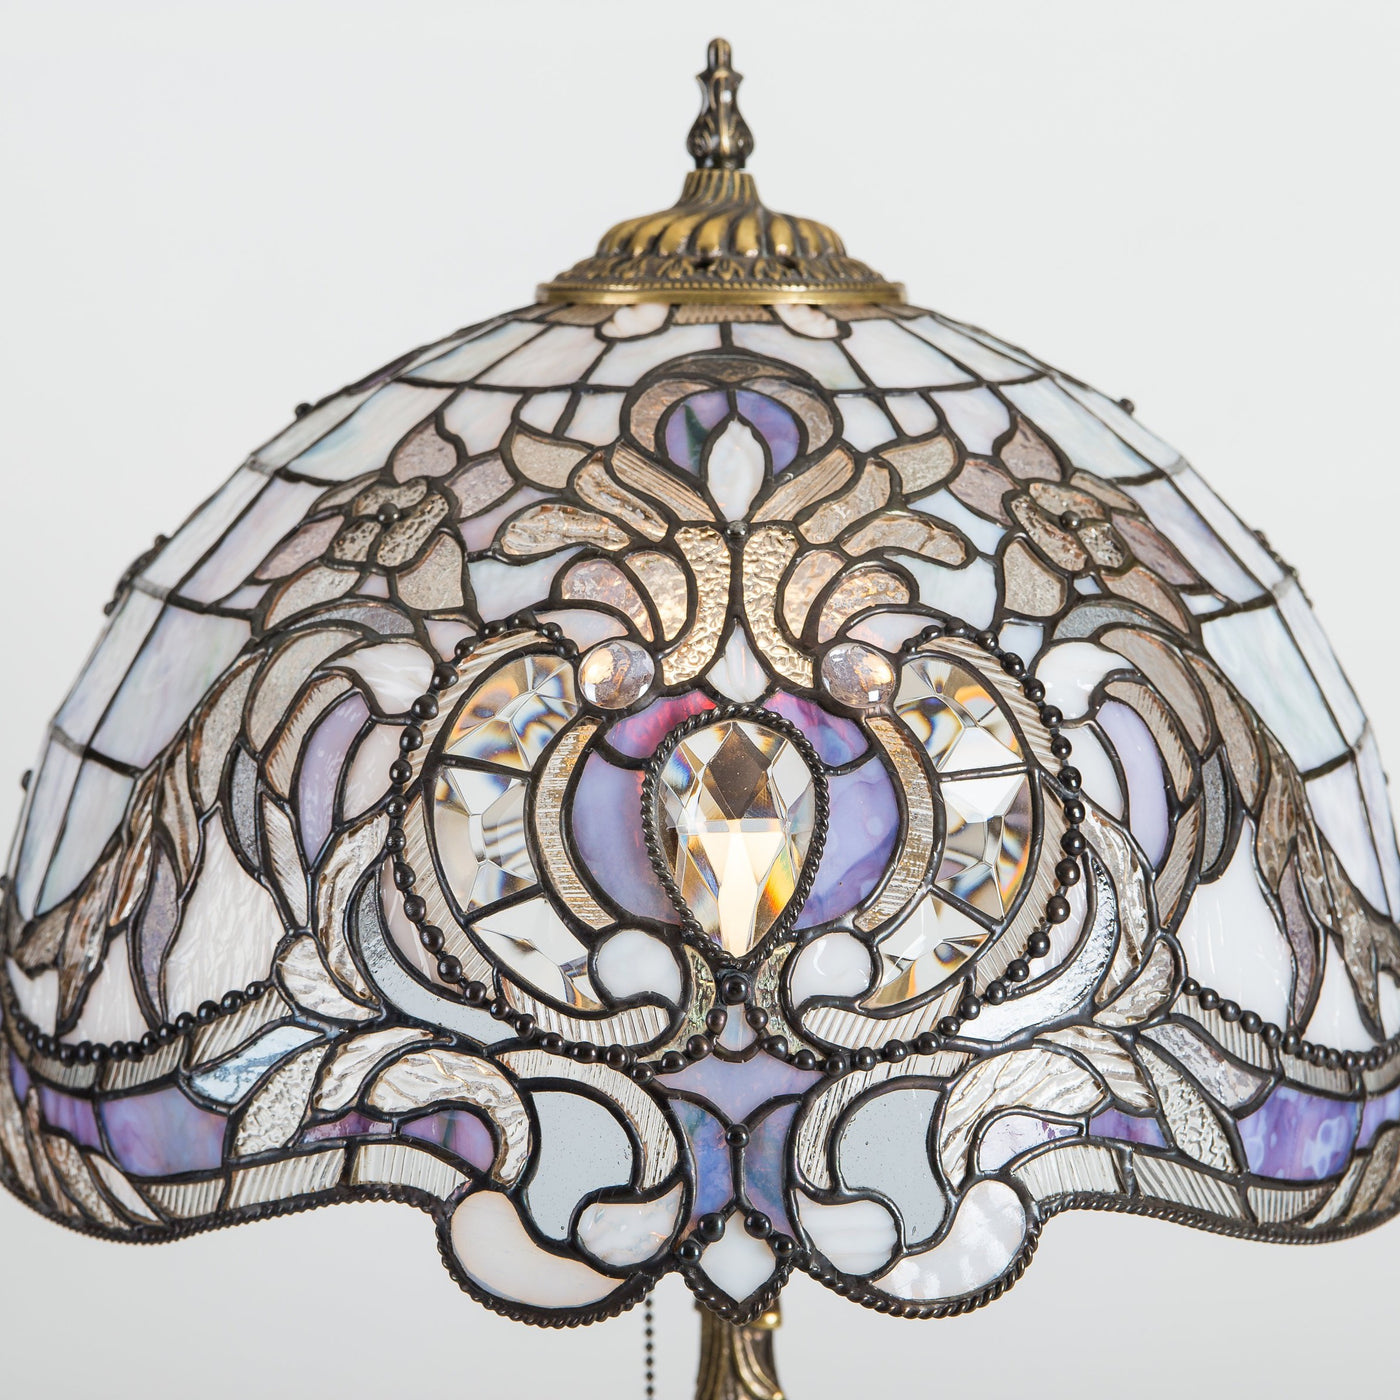 Zoomed stained glass Tiffany lampshade with purple markings and beveled inserts